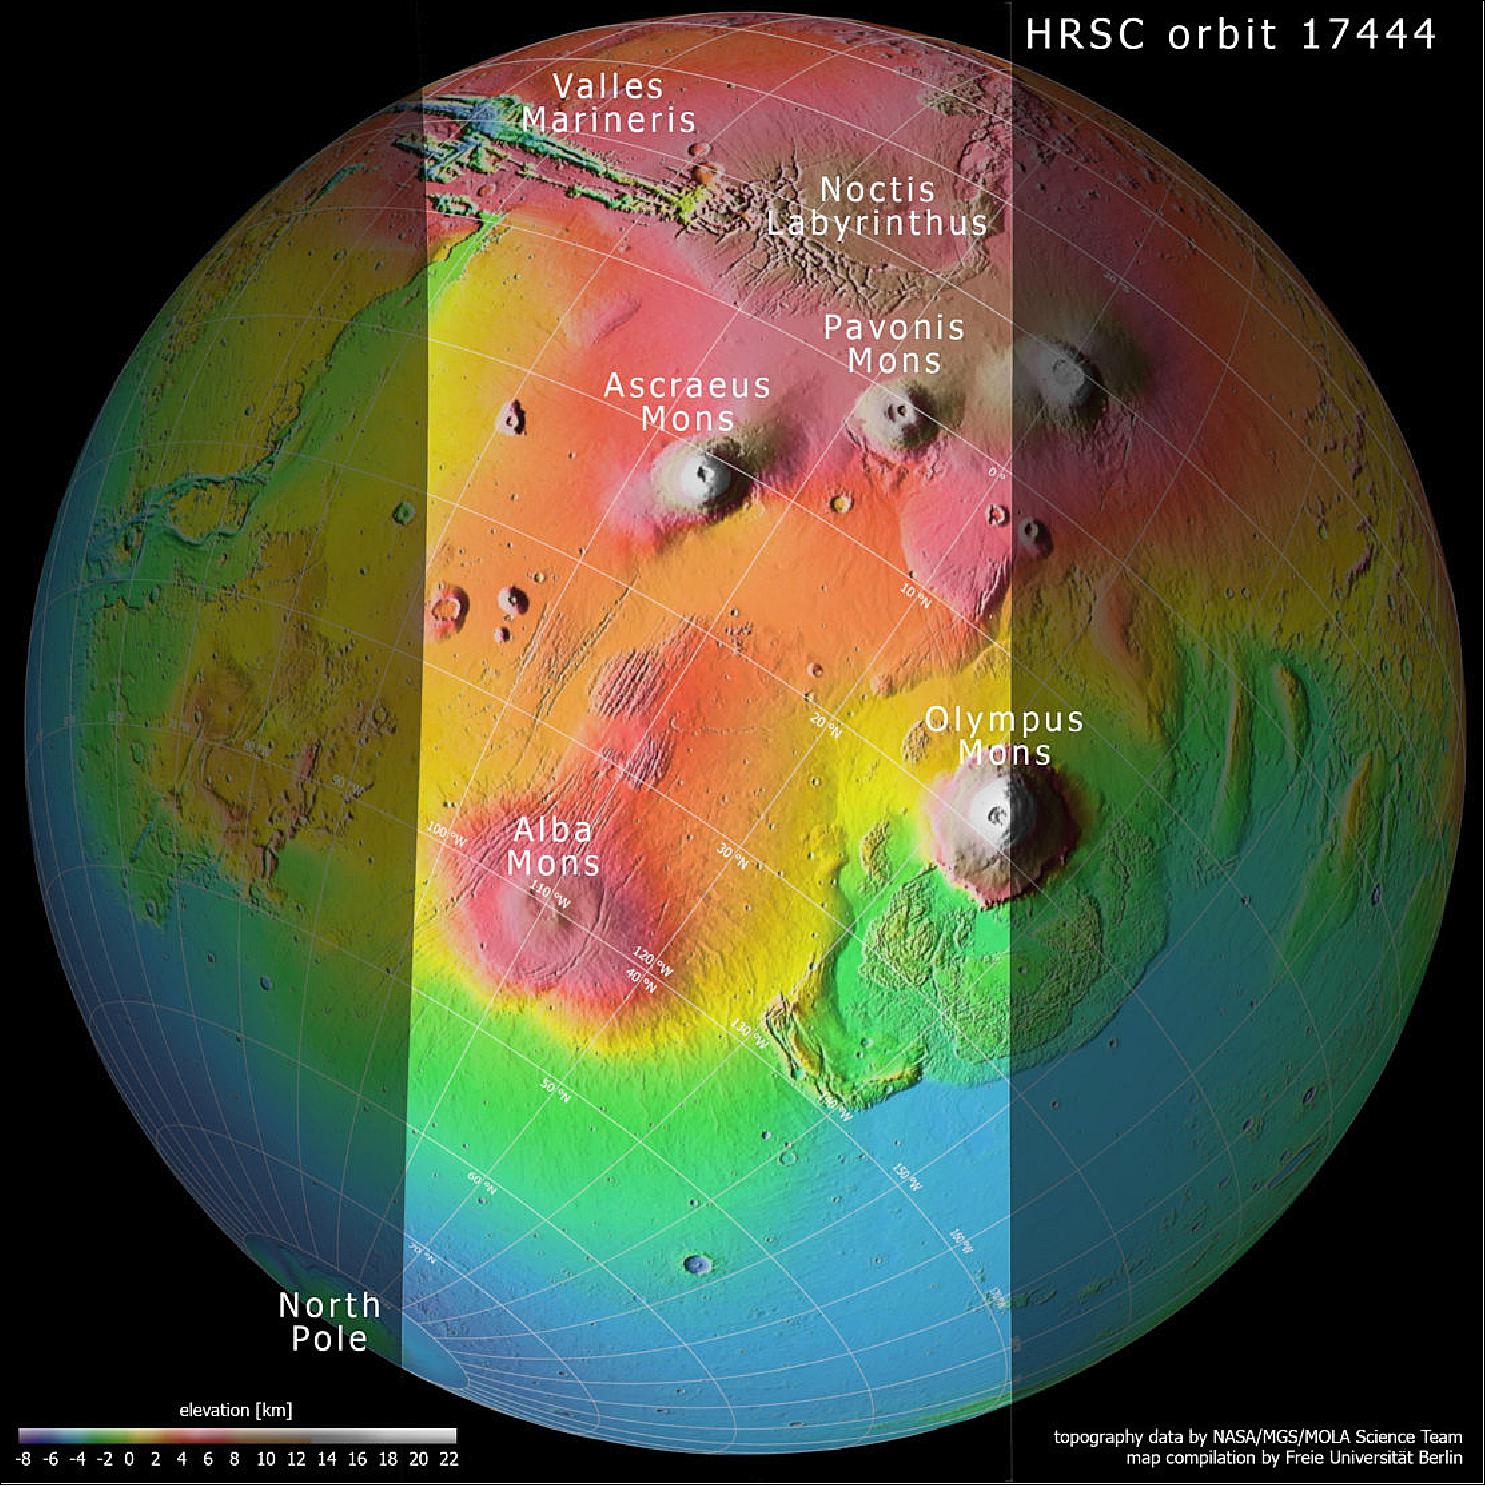 Figure 78: This context map is based on data from the MOLA (Mars Orbiter Laser Altimeter) experiment onboard NASA’s MGS (Mars Global Surveyor) mission. It shows the slice of Mars captured by the HRSC aboard ESA’s Mars Express spacecraft to celebrate the mission’s 15th anniversary: the intriguing and once-active Tharsis province (image credit: NASA/MGS/MOLA Science Team, FU Berlin)